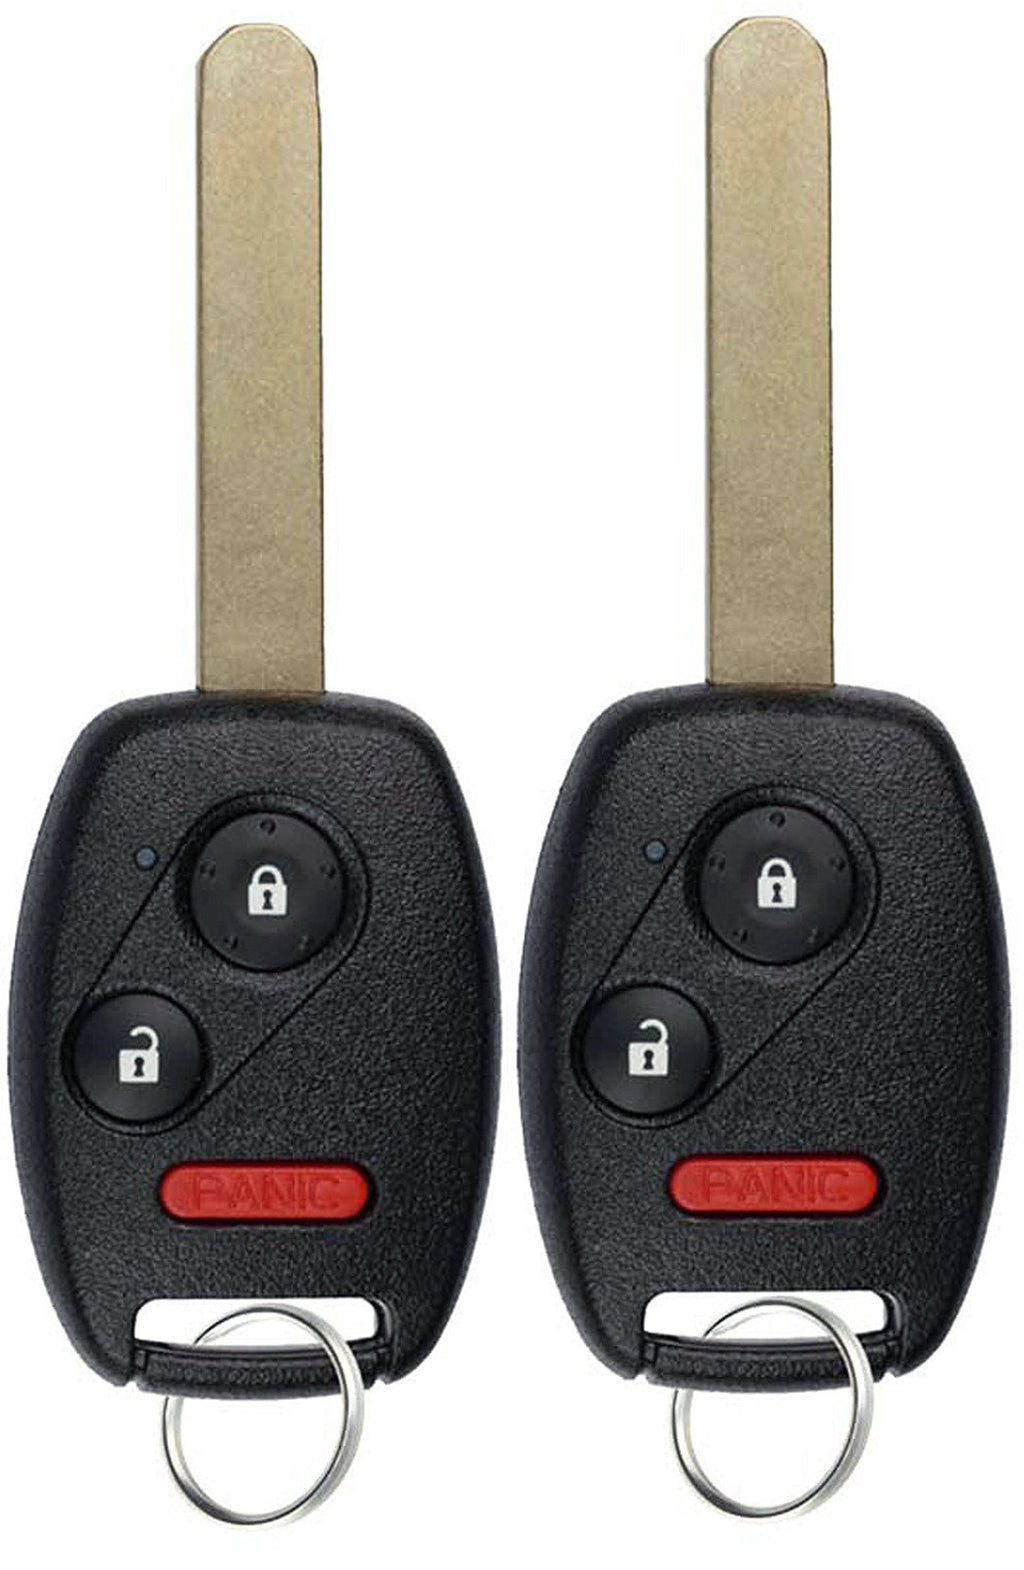  [AUSTRALIA] - KeylessOption Keyless Entry Remote Control Uncut Car Ignition Chip Key Fob Replacement for Honda Ridgeline Odyssey OUCG8D-380H-A (Pack of 2) black